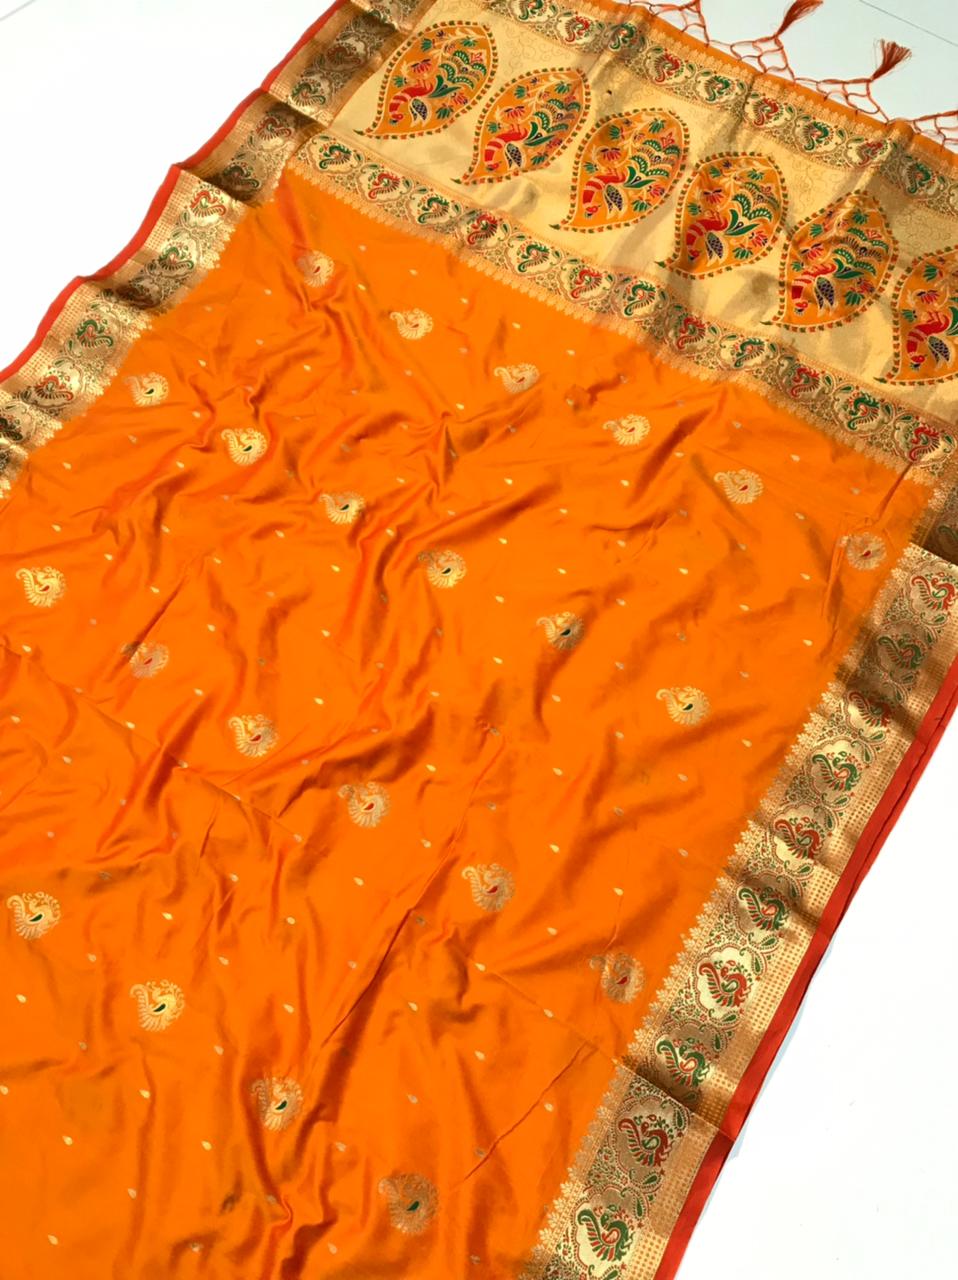 Wedding wear Paithani Border Prestitched Wrap in 1 Minute Saree with ornate pallu - Isadora Life Online Shopping Store